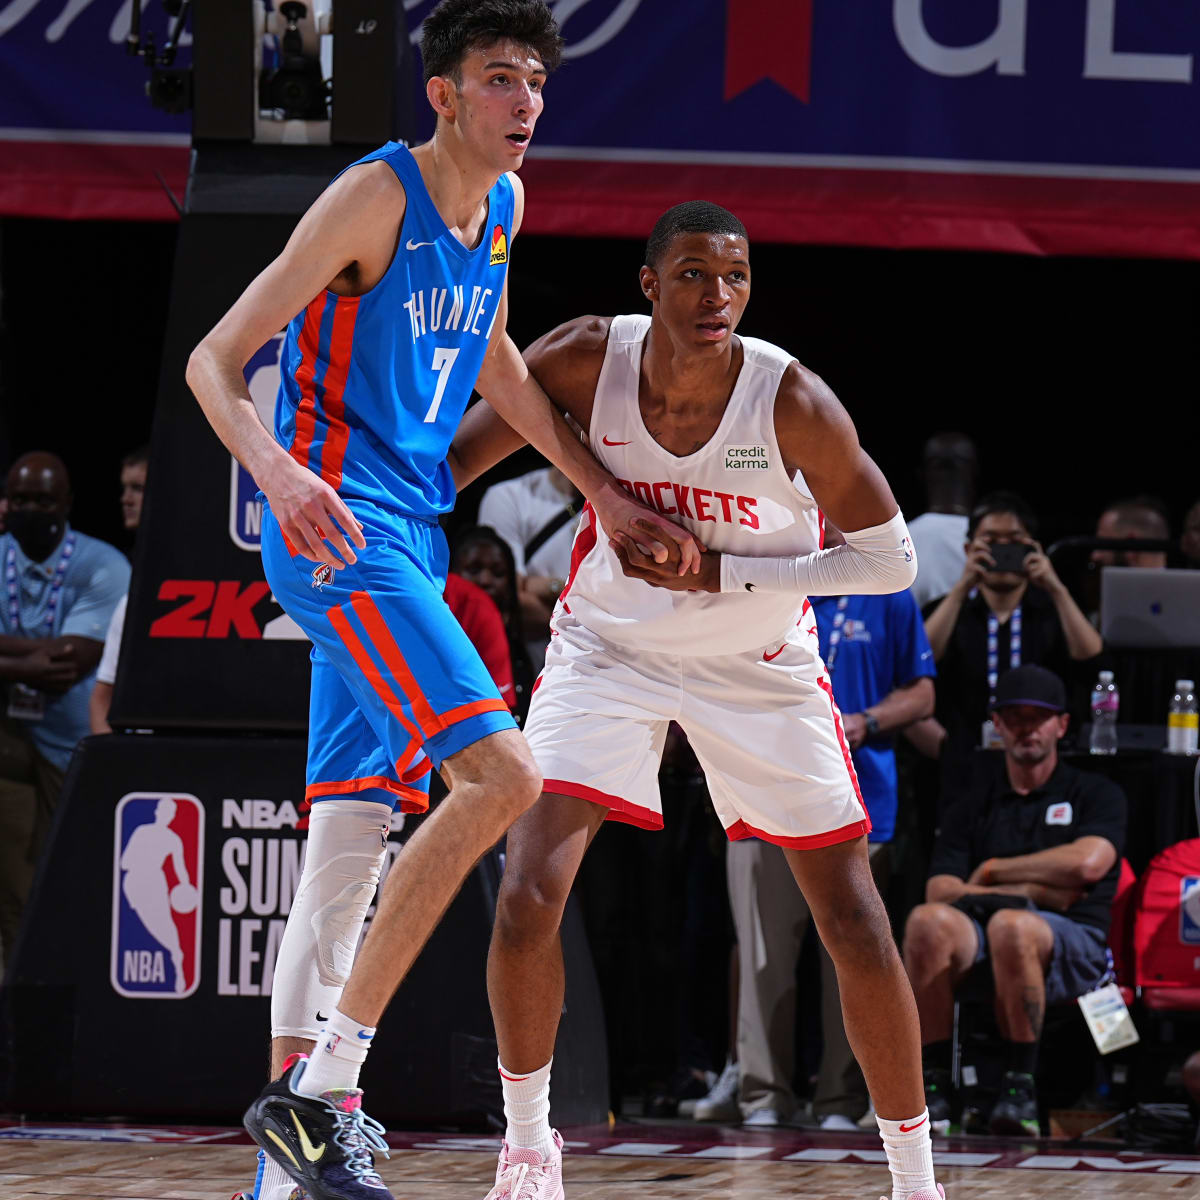 NBA Summer League: NBA Summer League: Know the best players in the